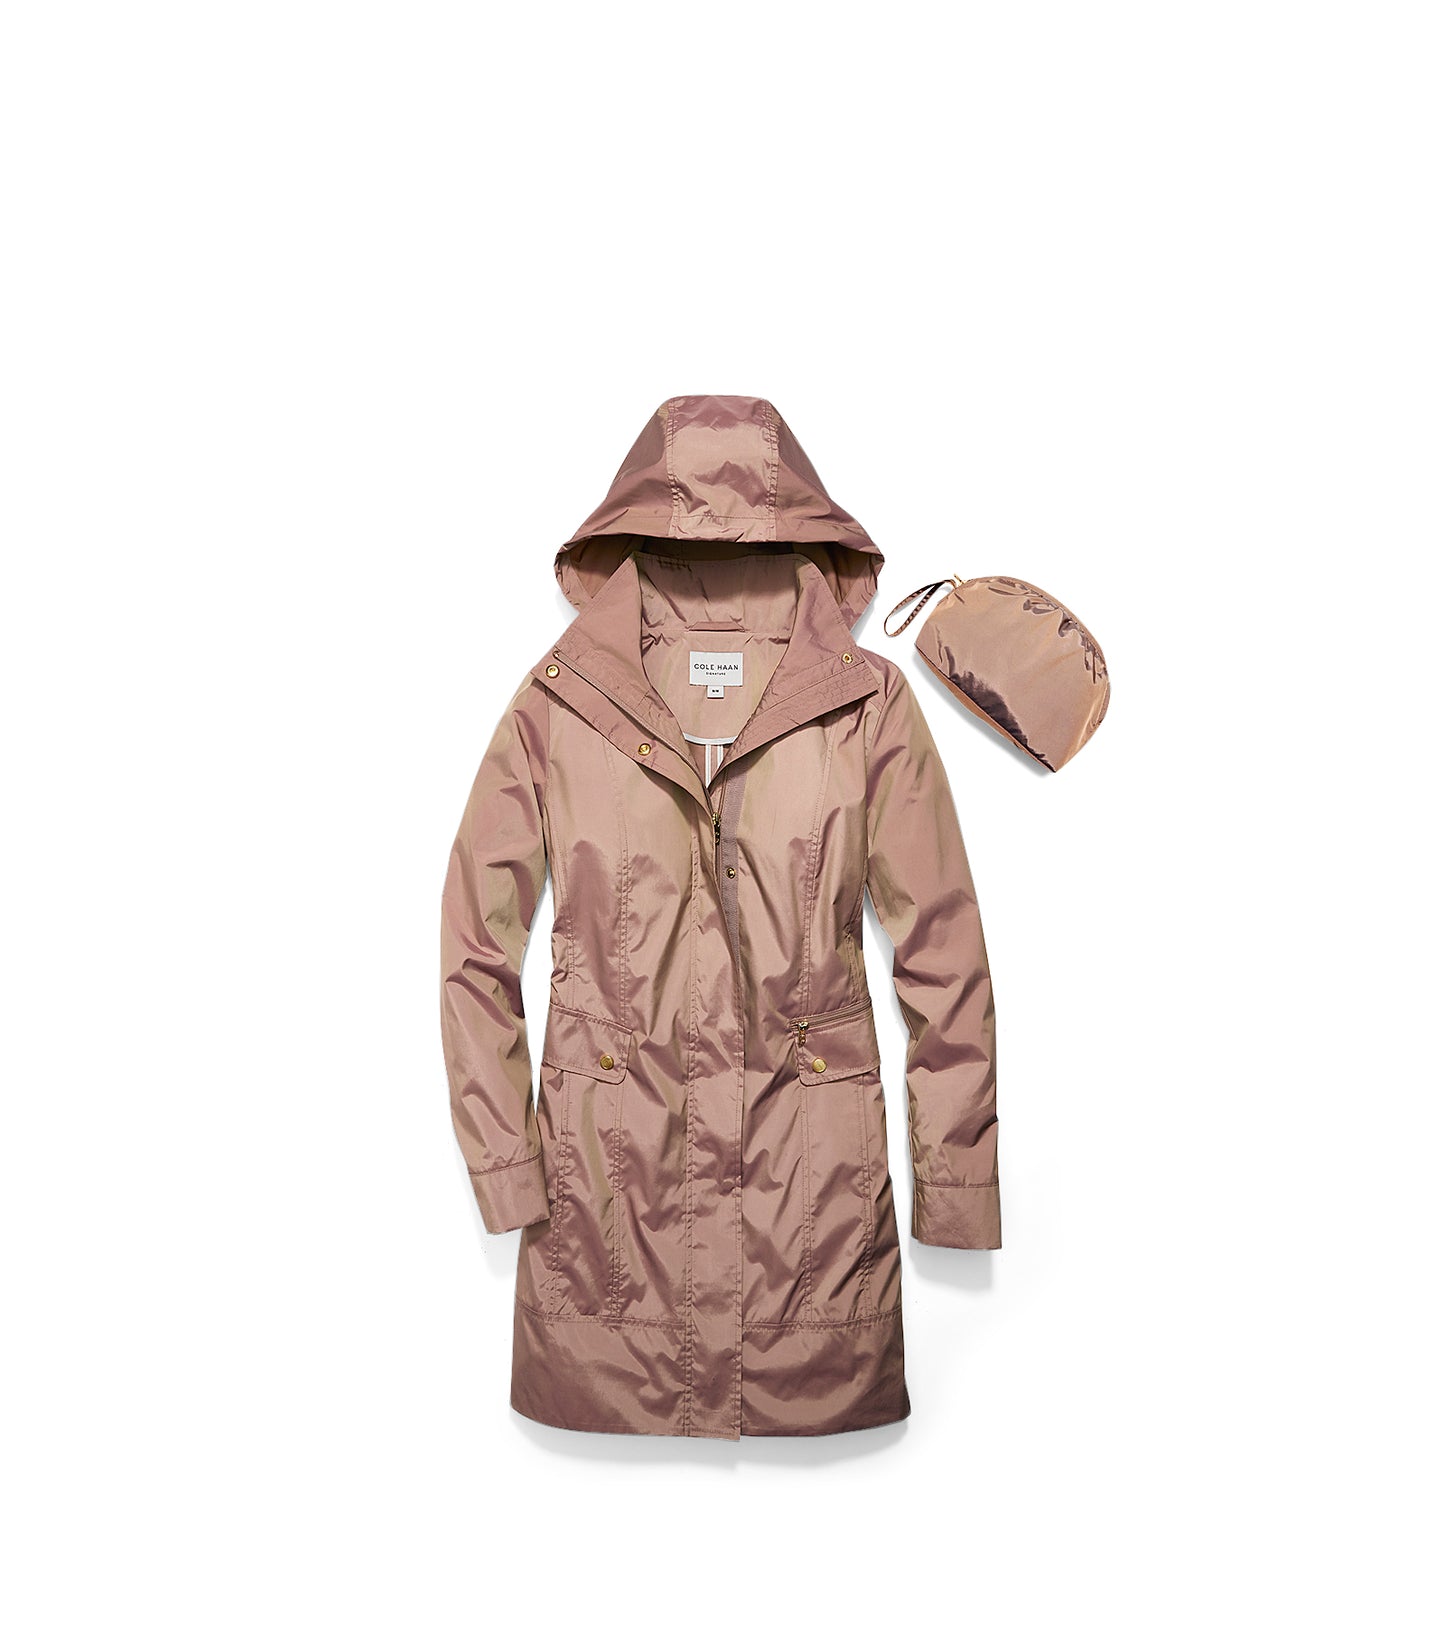 Women's Packable Hooded Rain Jacket with Bow